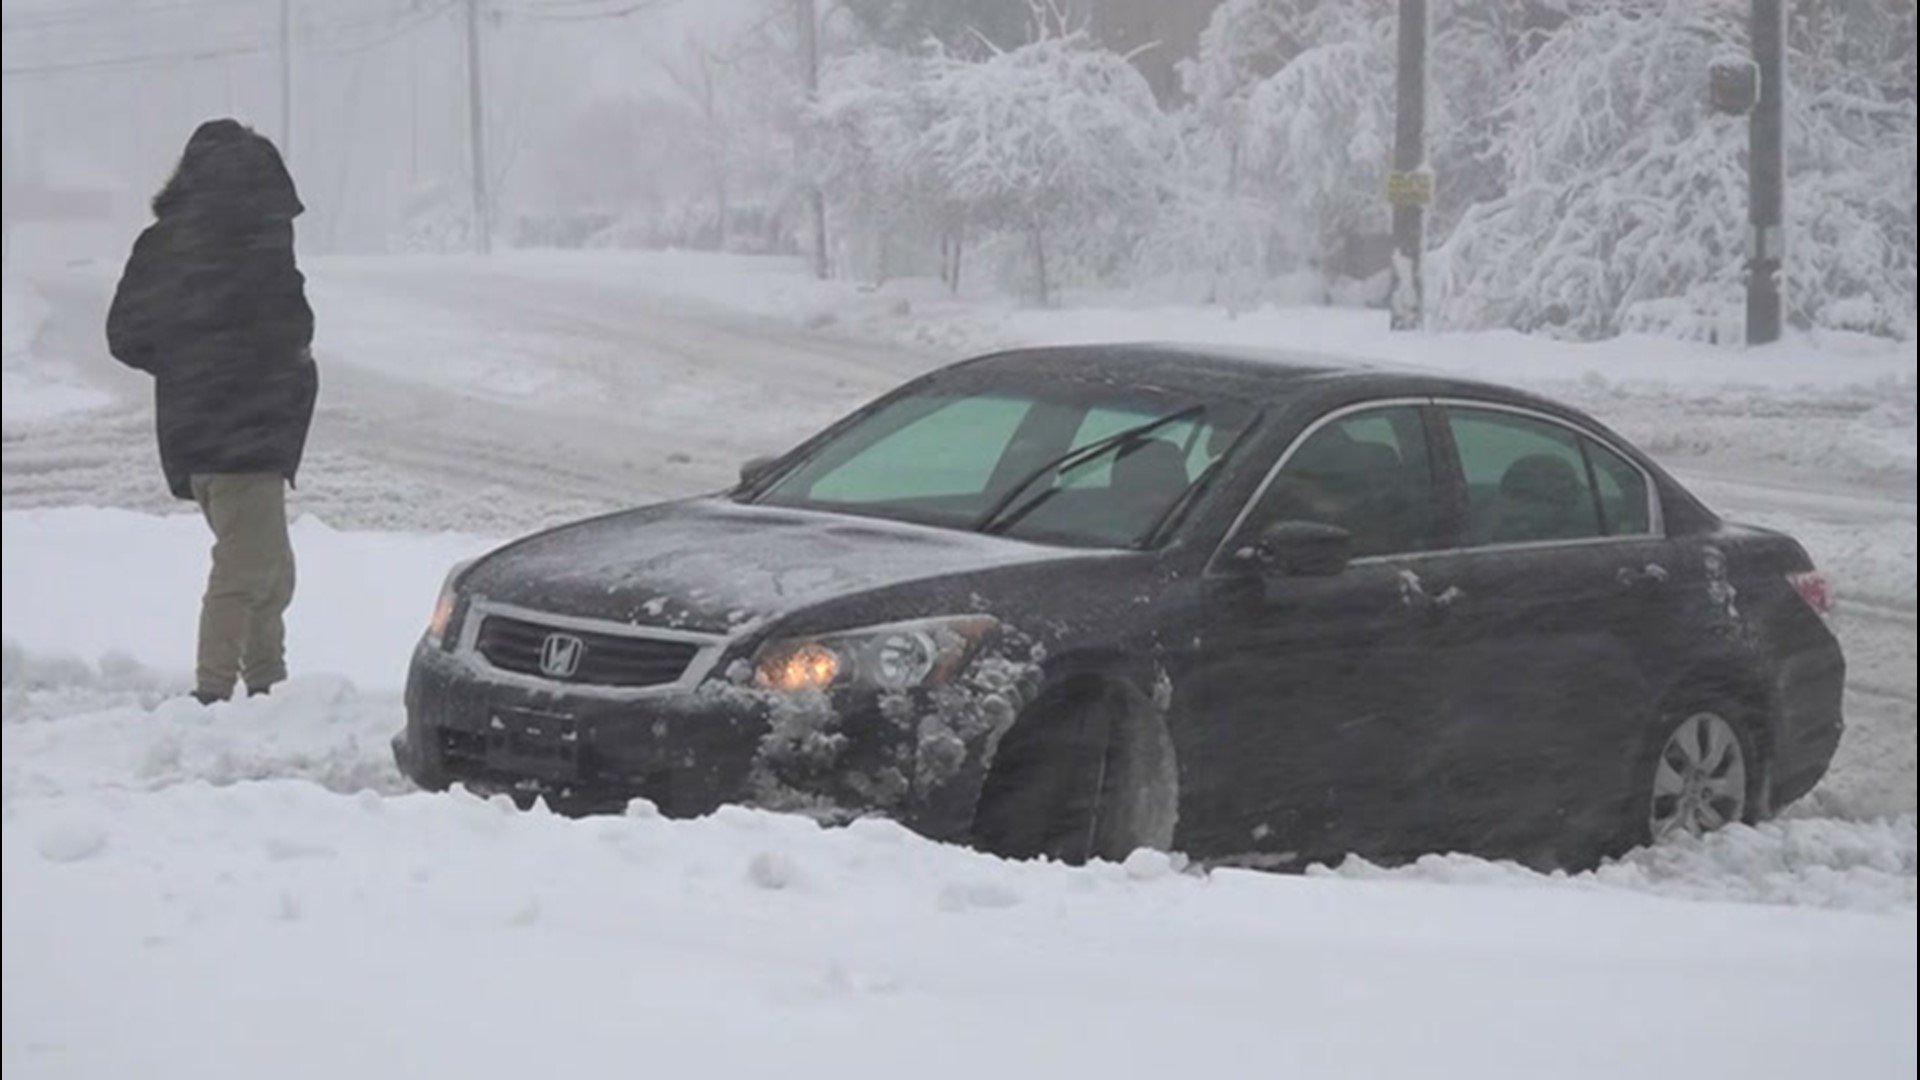 Drivers in Cleveland, Ohio, struggled to commute through the treacherous snow and ice conditions on the roads on Dec. 1.